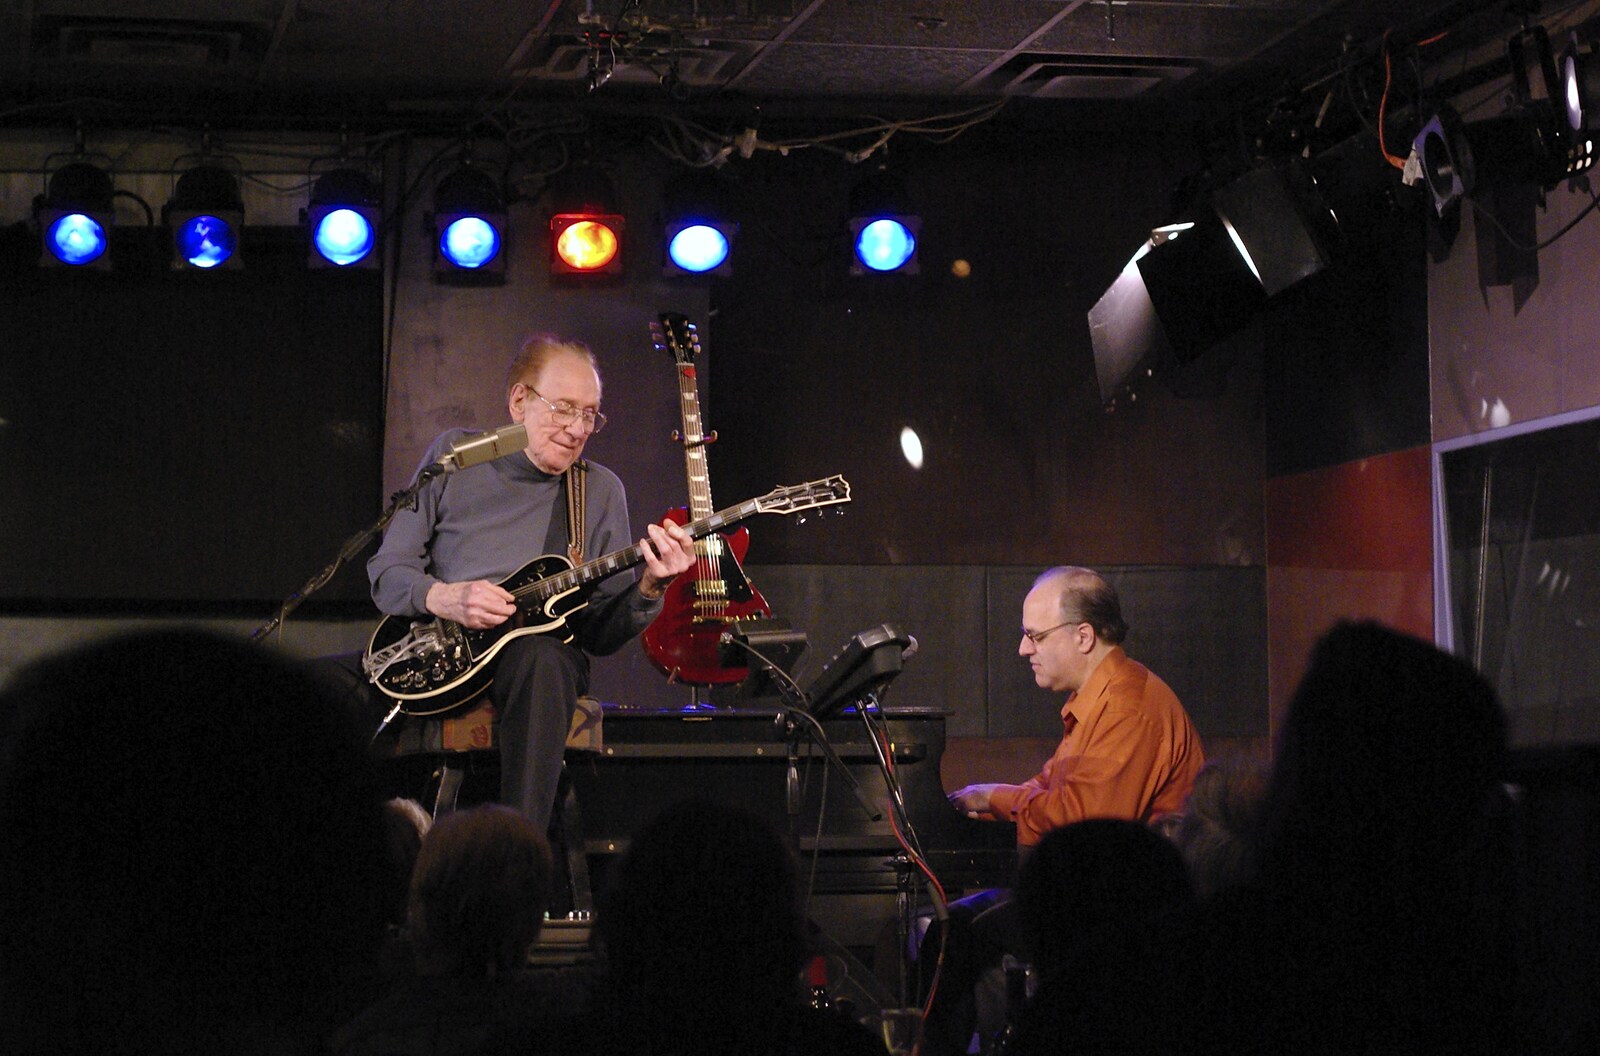 Les Paul and his piano player from A Central Park Marathon, Les Paul at the Iridium Club and an Empire State Sunset, New York, US - 25th March 2007